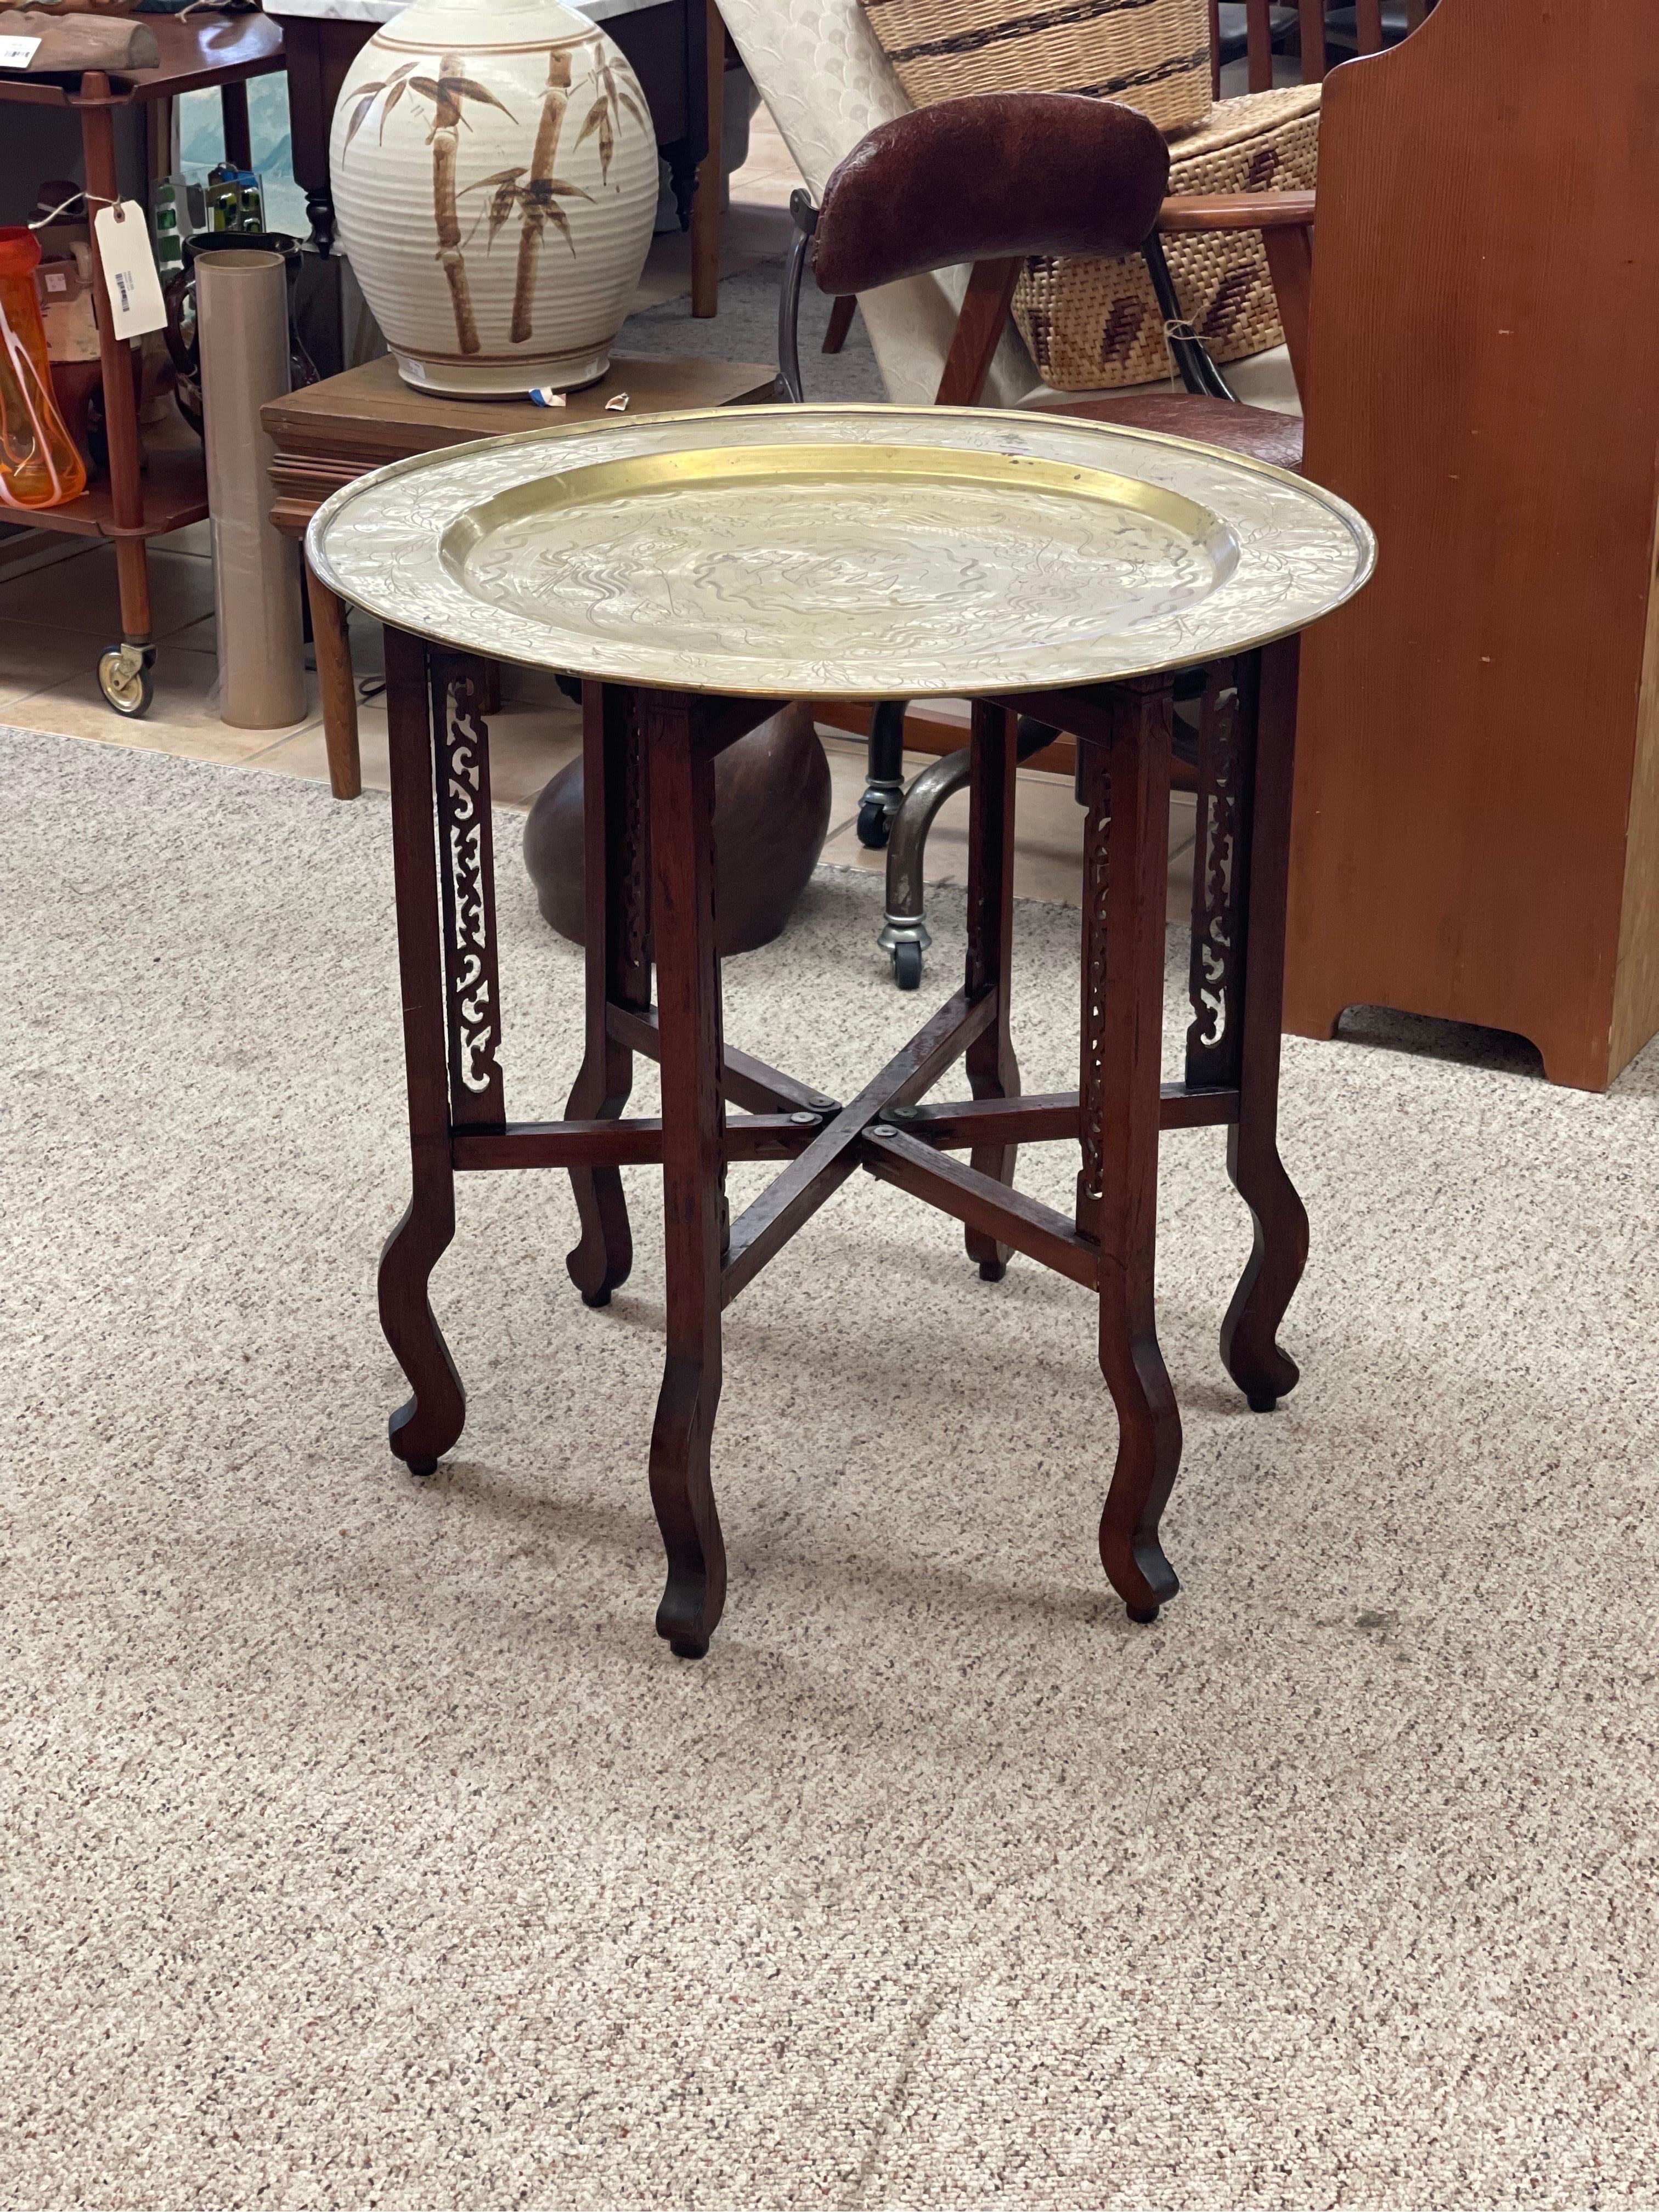 Accent Table with Brass Tray.

Dimensions. 25 W ; 25 D ; 24 1/2 H.